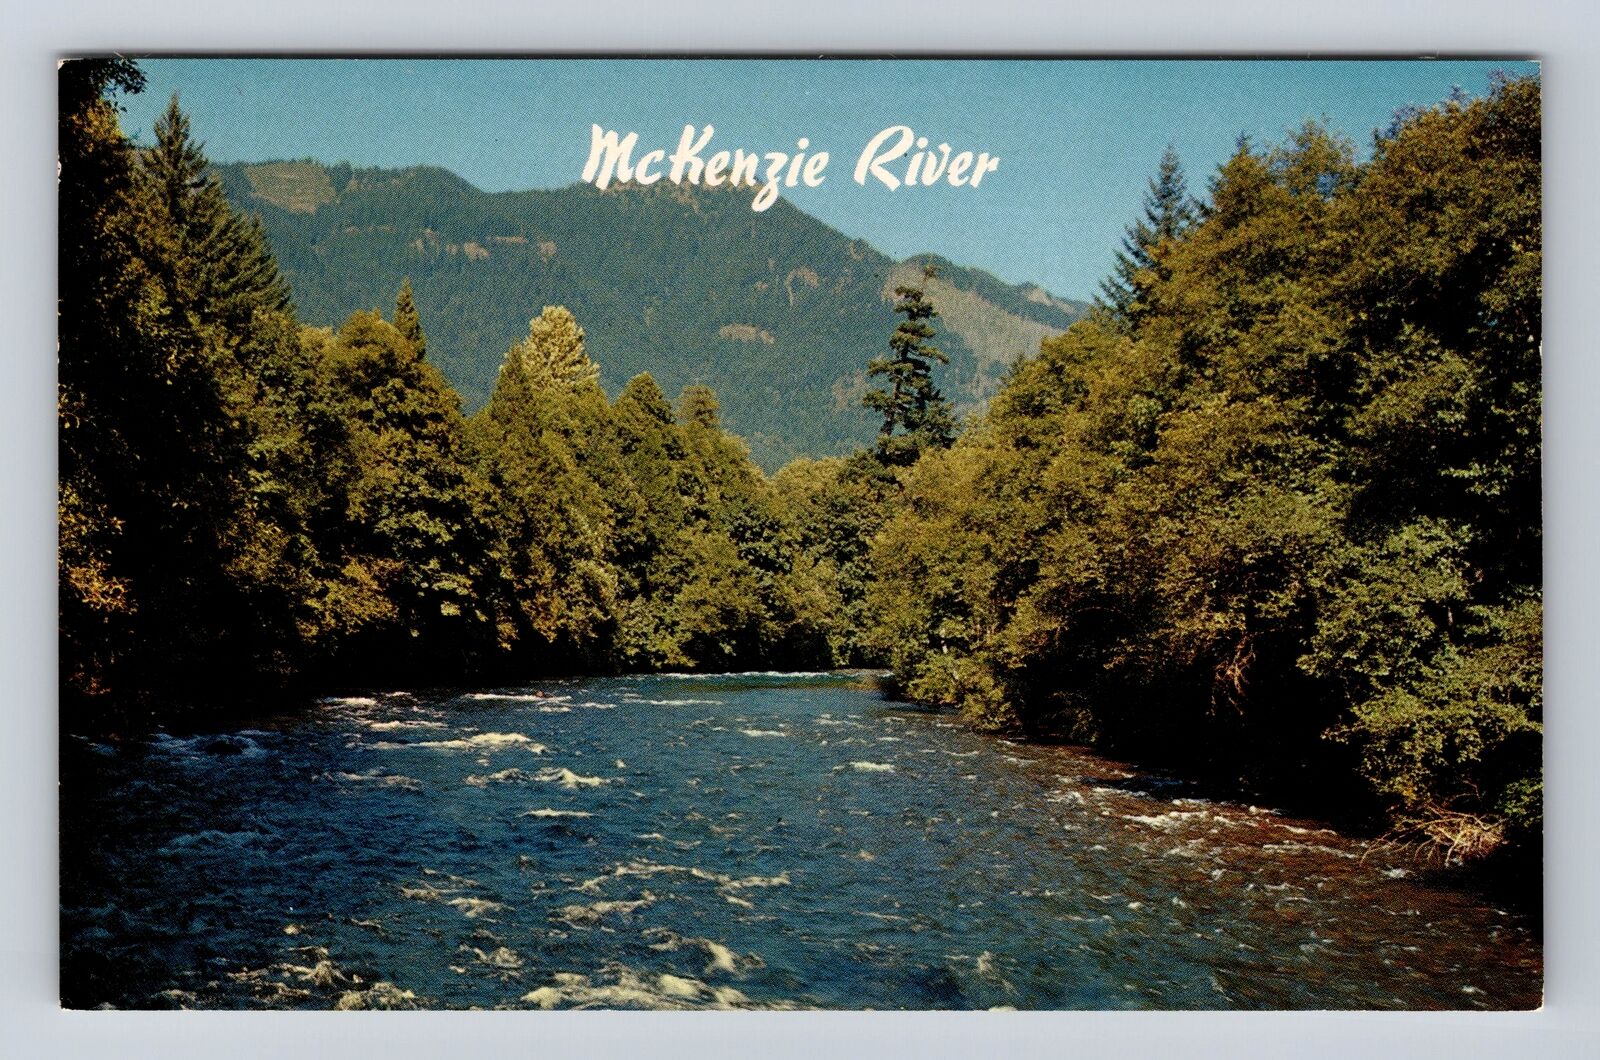 McKenzie River OR-Oregon, Scenic Views River and Mountains, Vintage Postcard